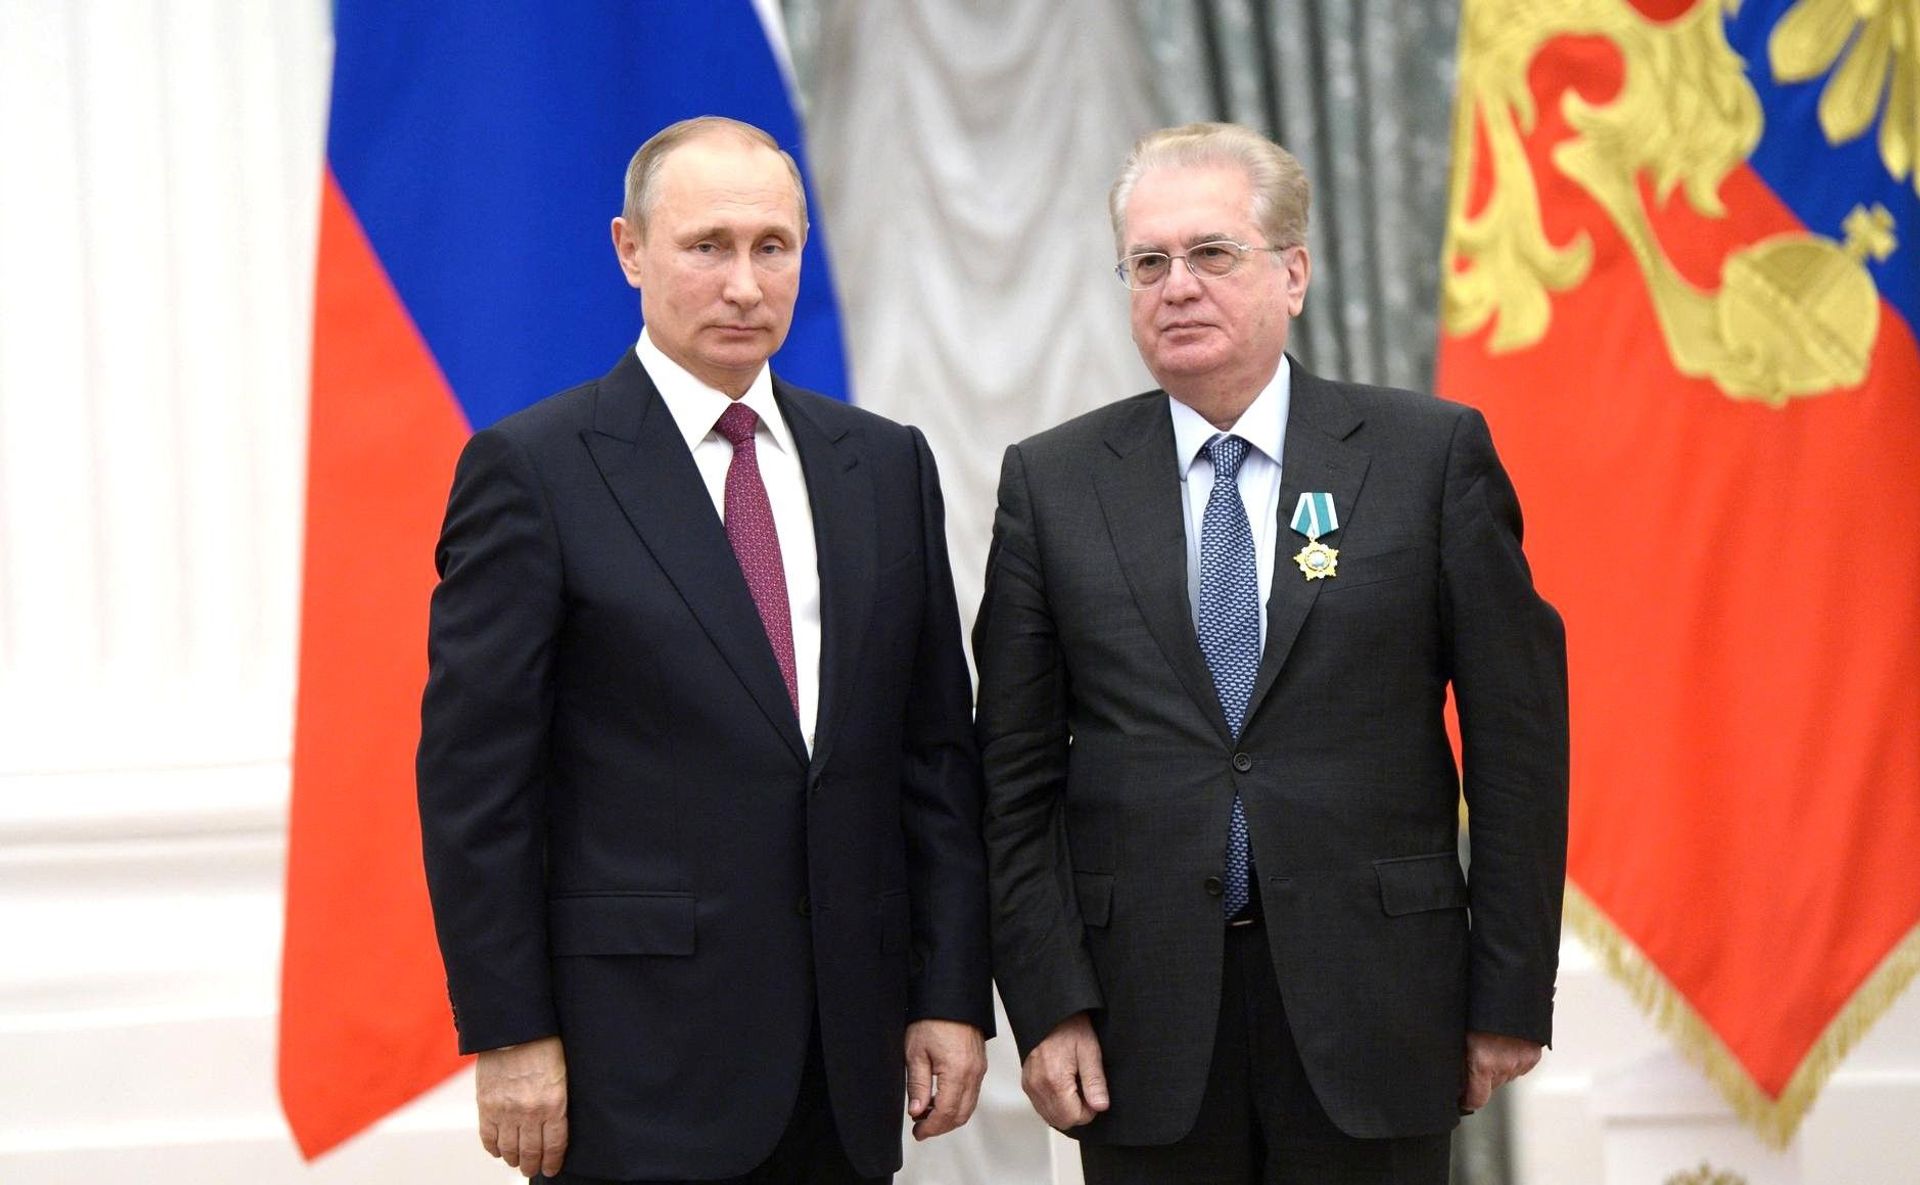 Mikhail Piotrovsky, the director of the State Hermitage Museum in St Petersburg since 1992, was awarded Russia's Order of Friendship by President Vladimir Putin in 2016 Photo: courtesy of the Kremlin